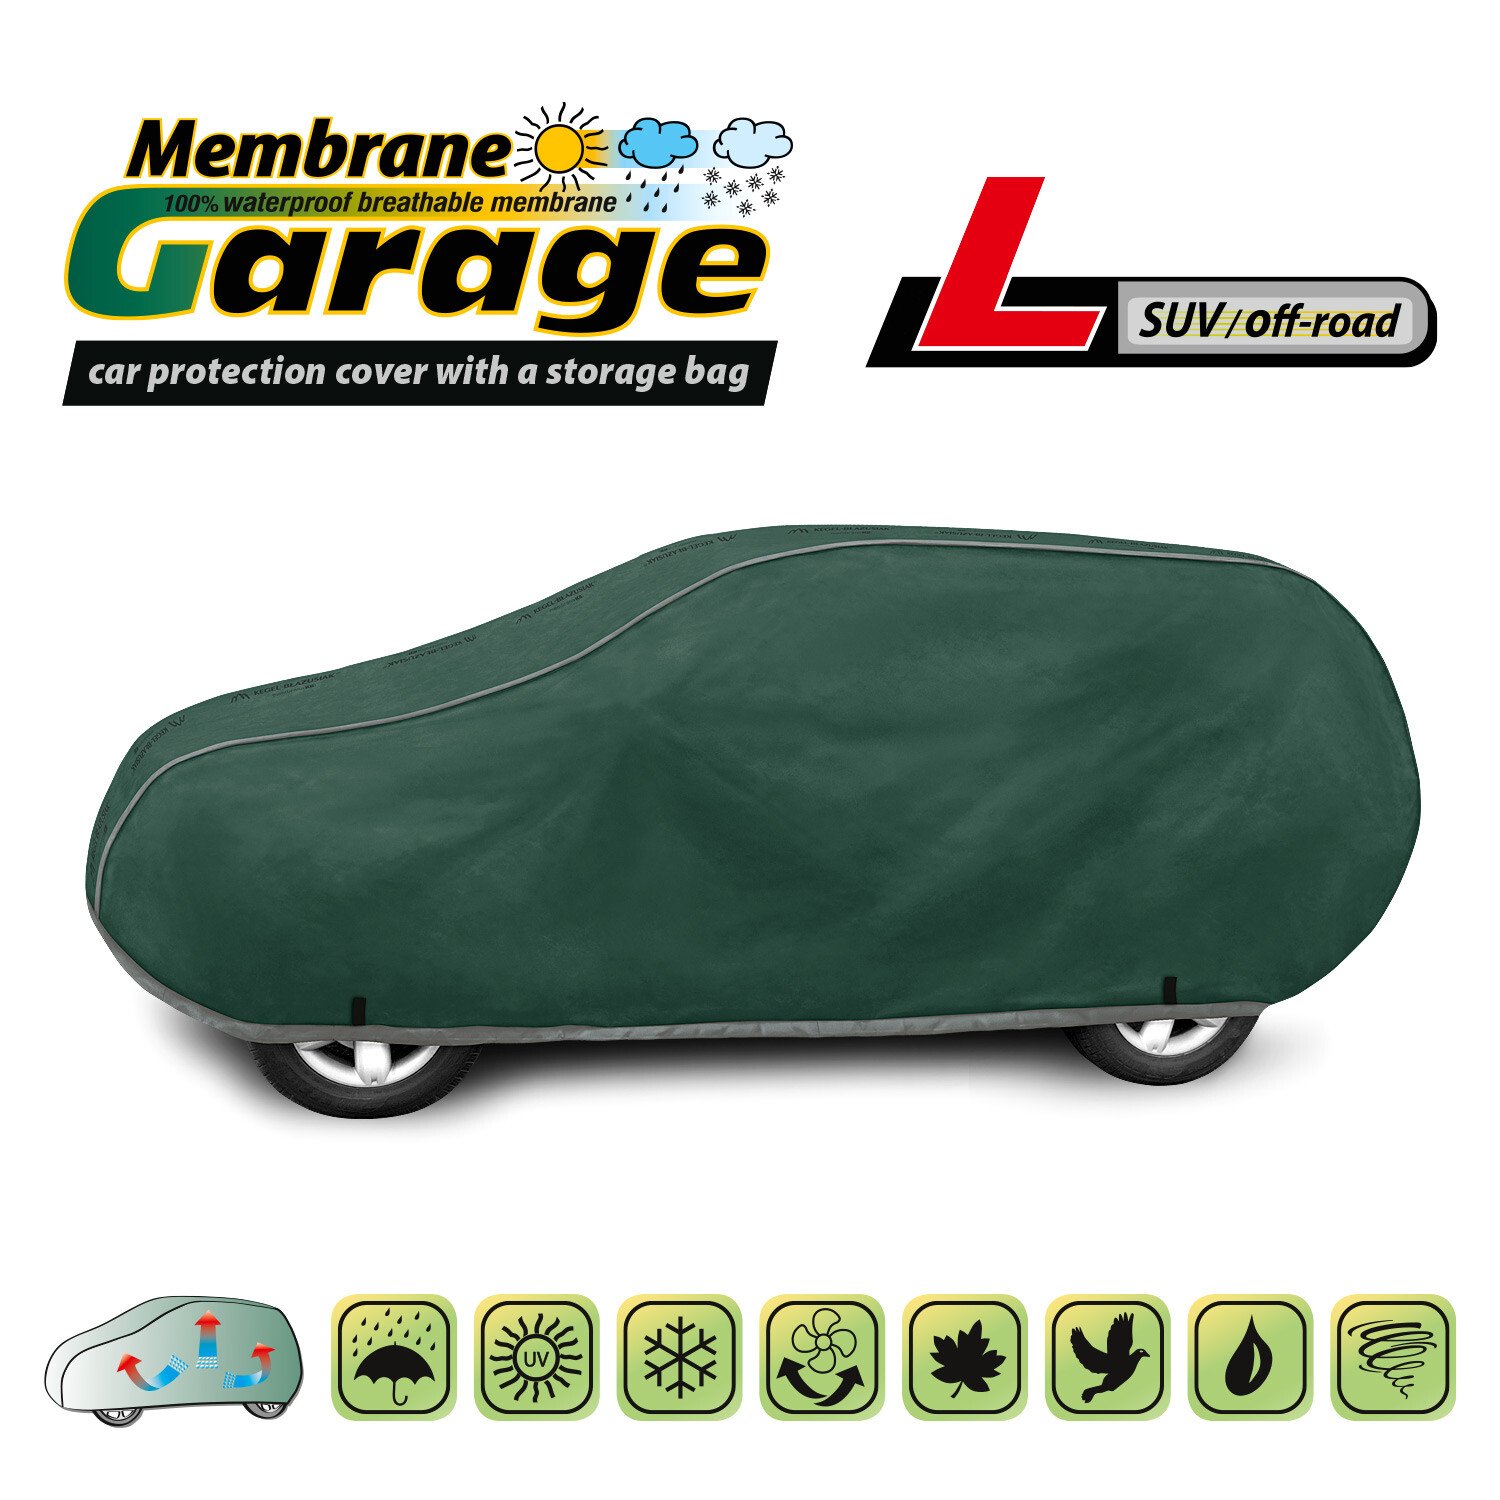 Membrane Garage full car cover, completely waterproof and breathable - L - SUV/Off-Road thumb